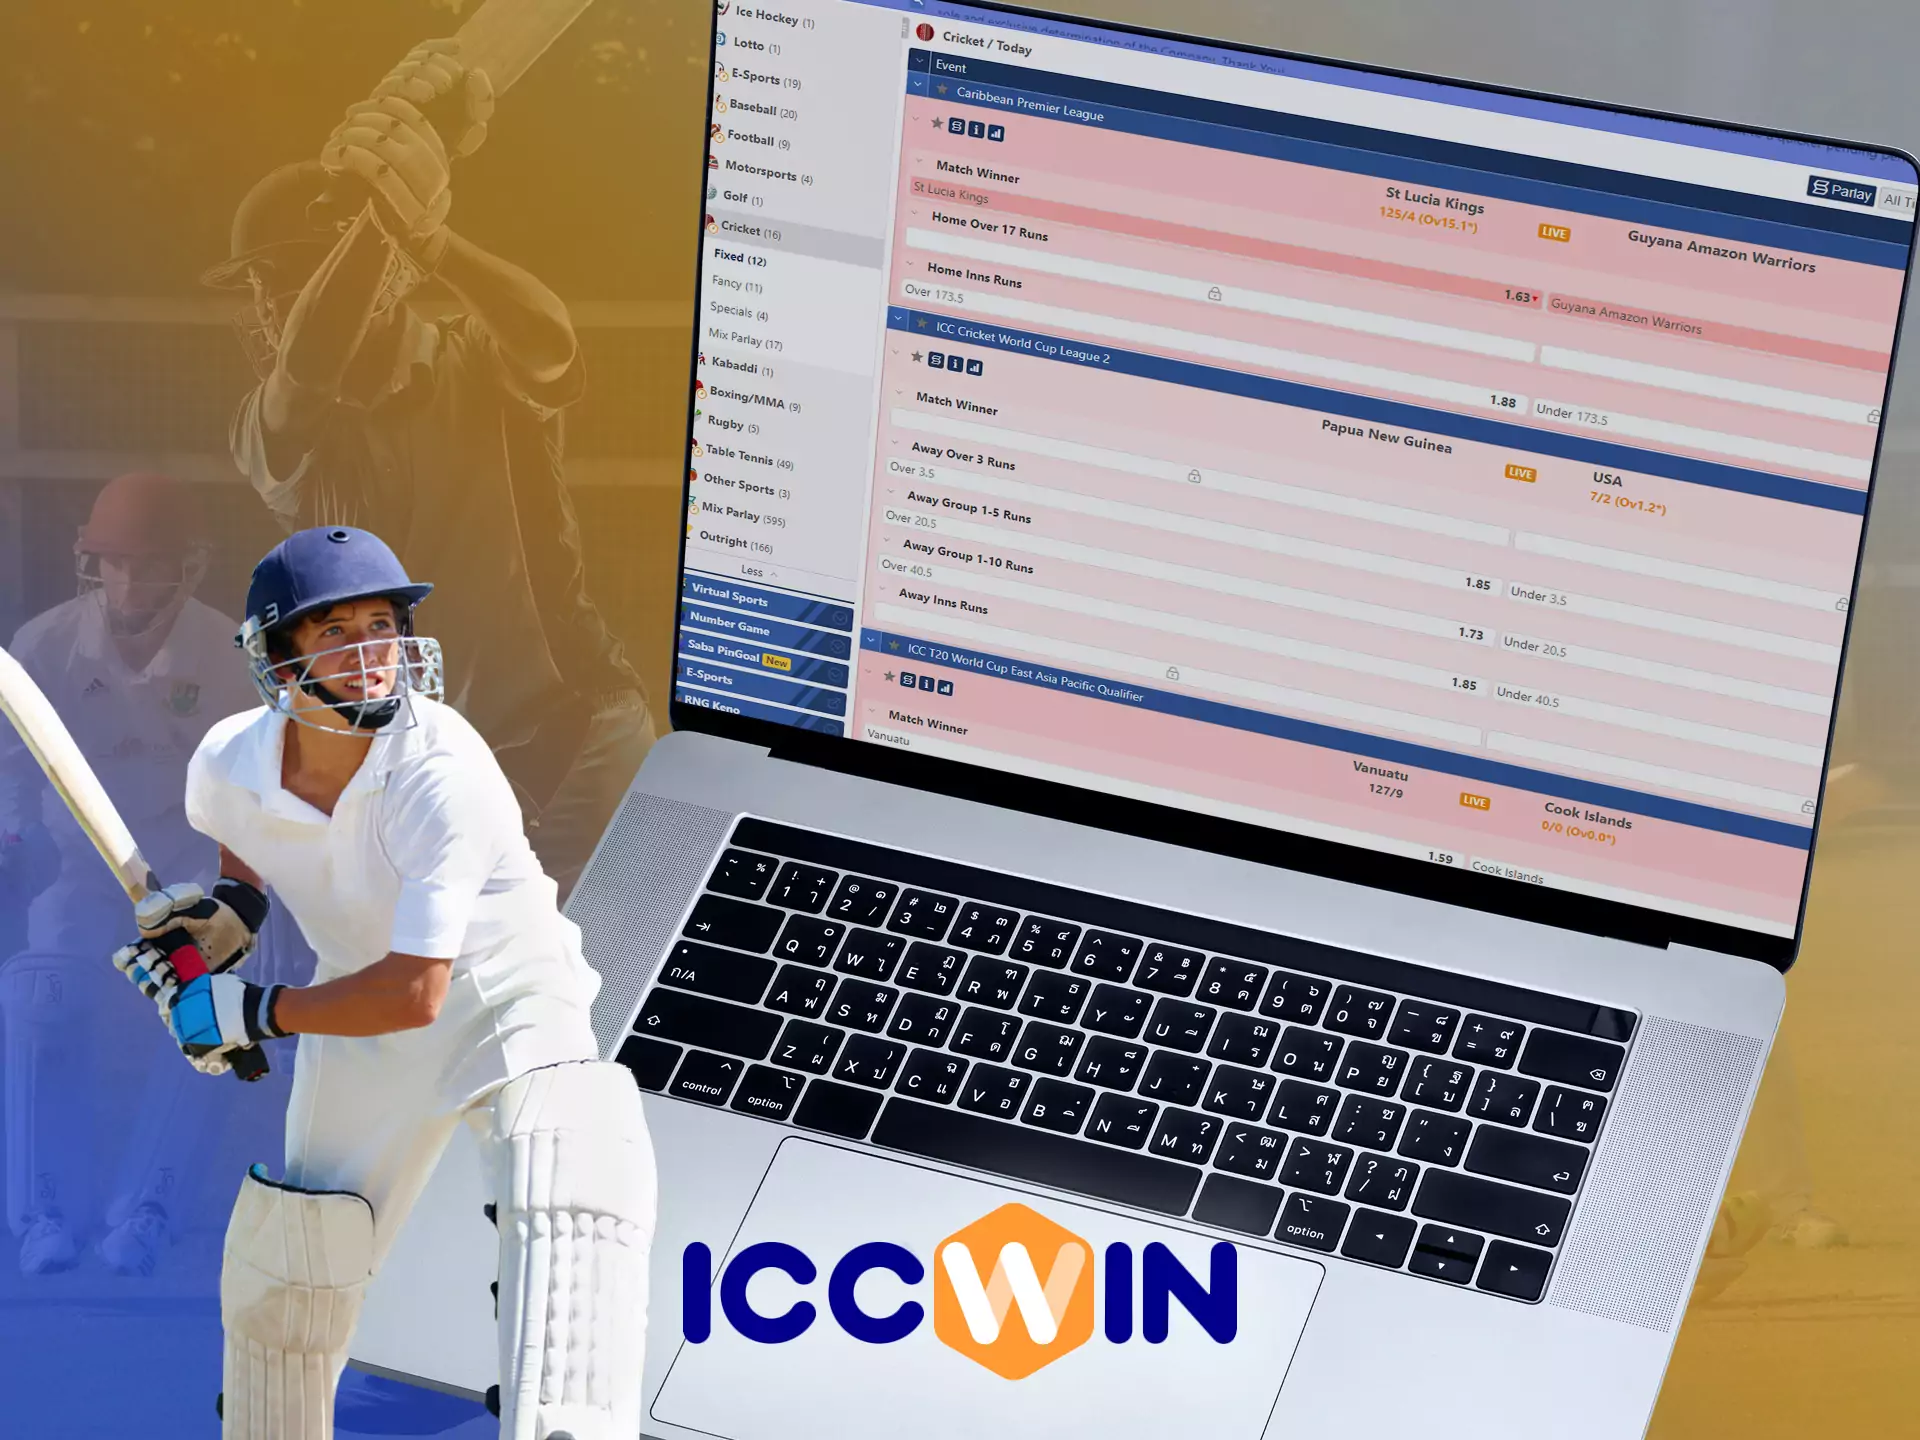 Choose a match and a bet type you want to use on the ICCWin website.